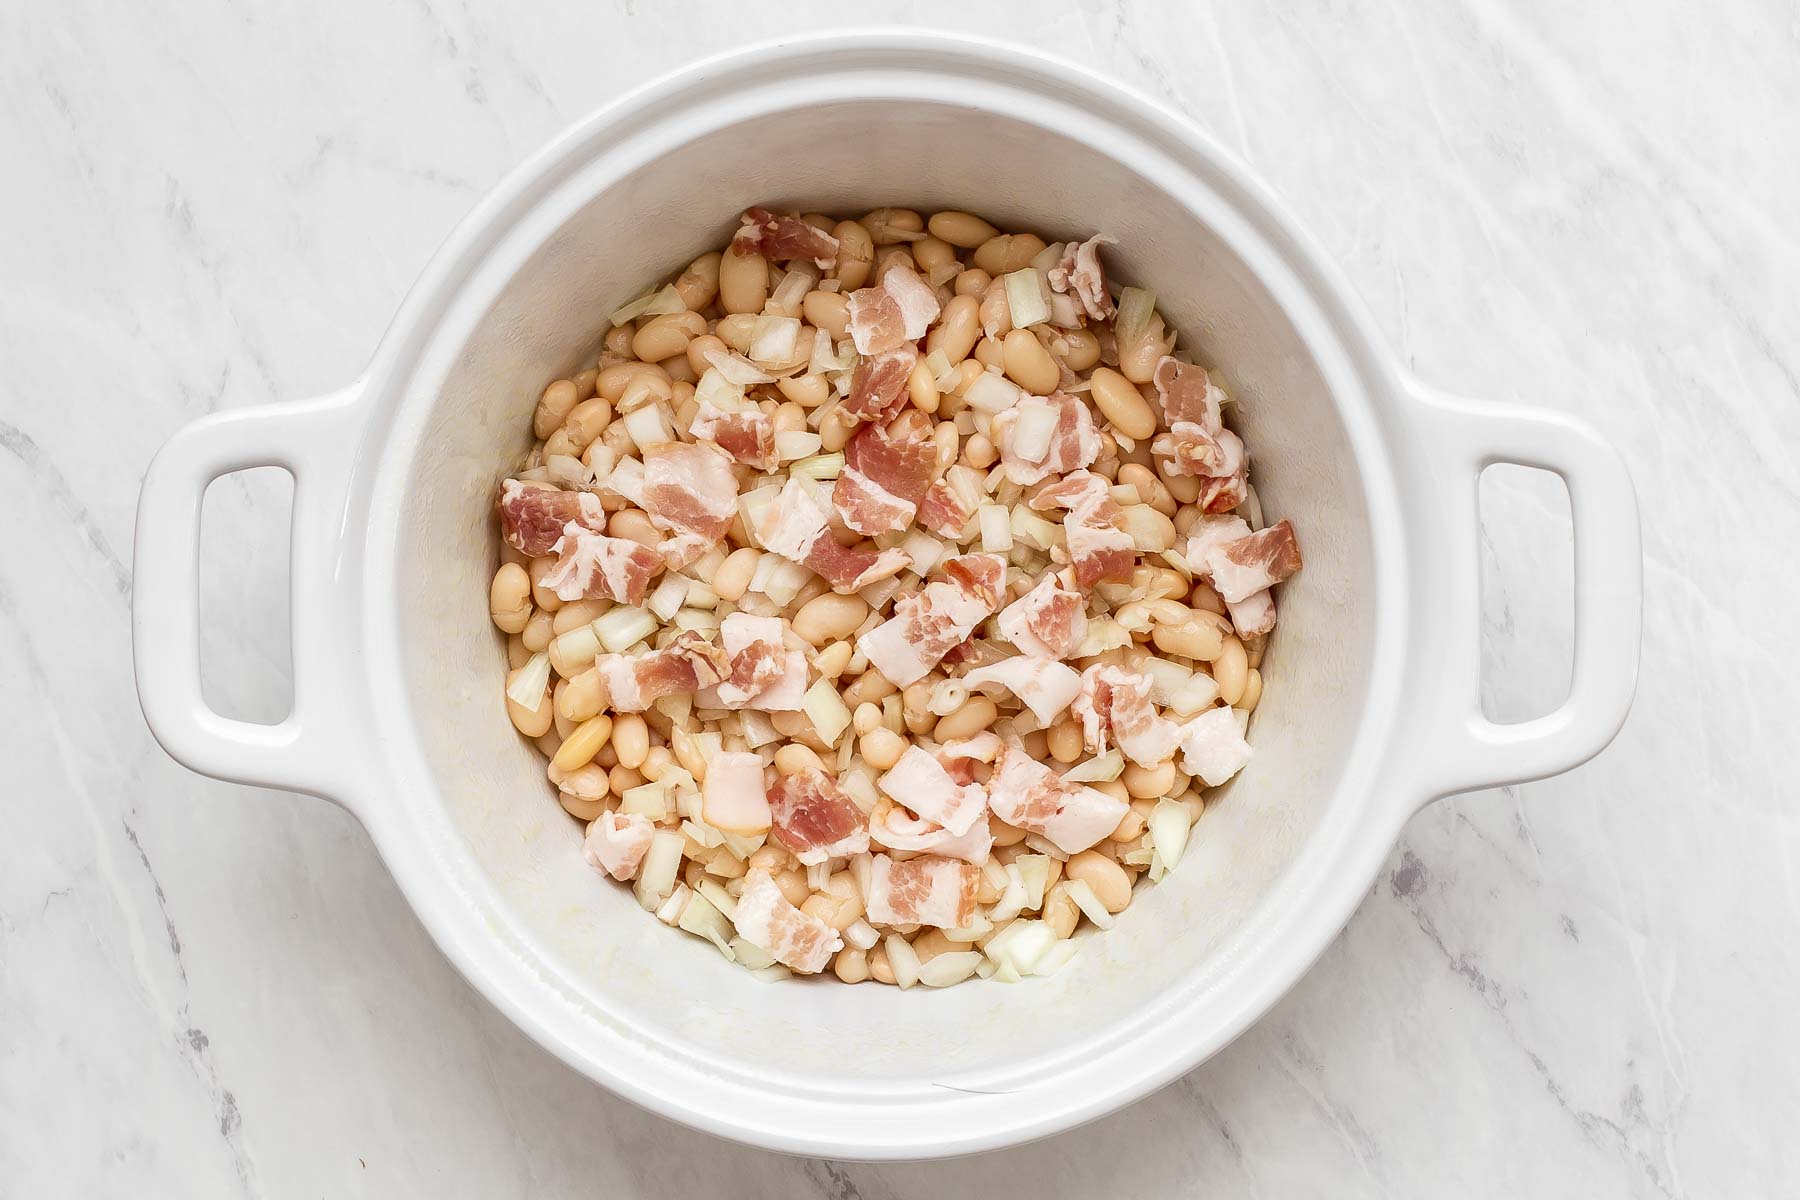 White beans and onions and bacon layered together in white casserole dish.